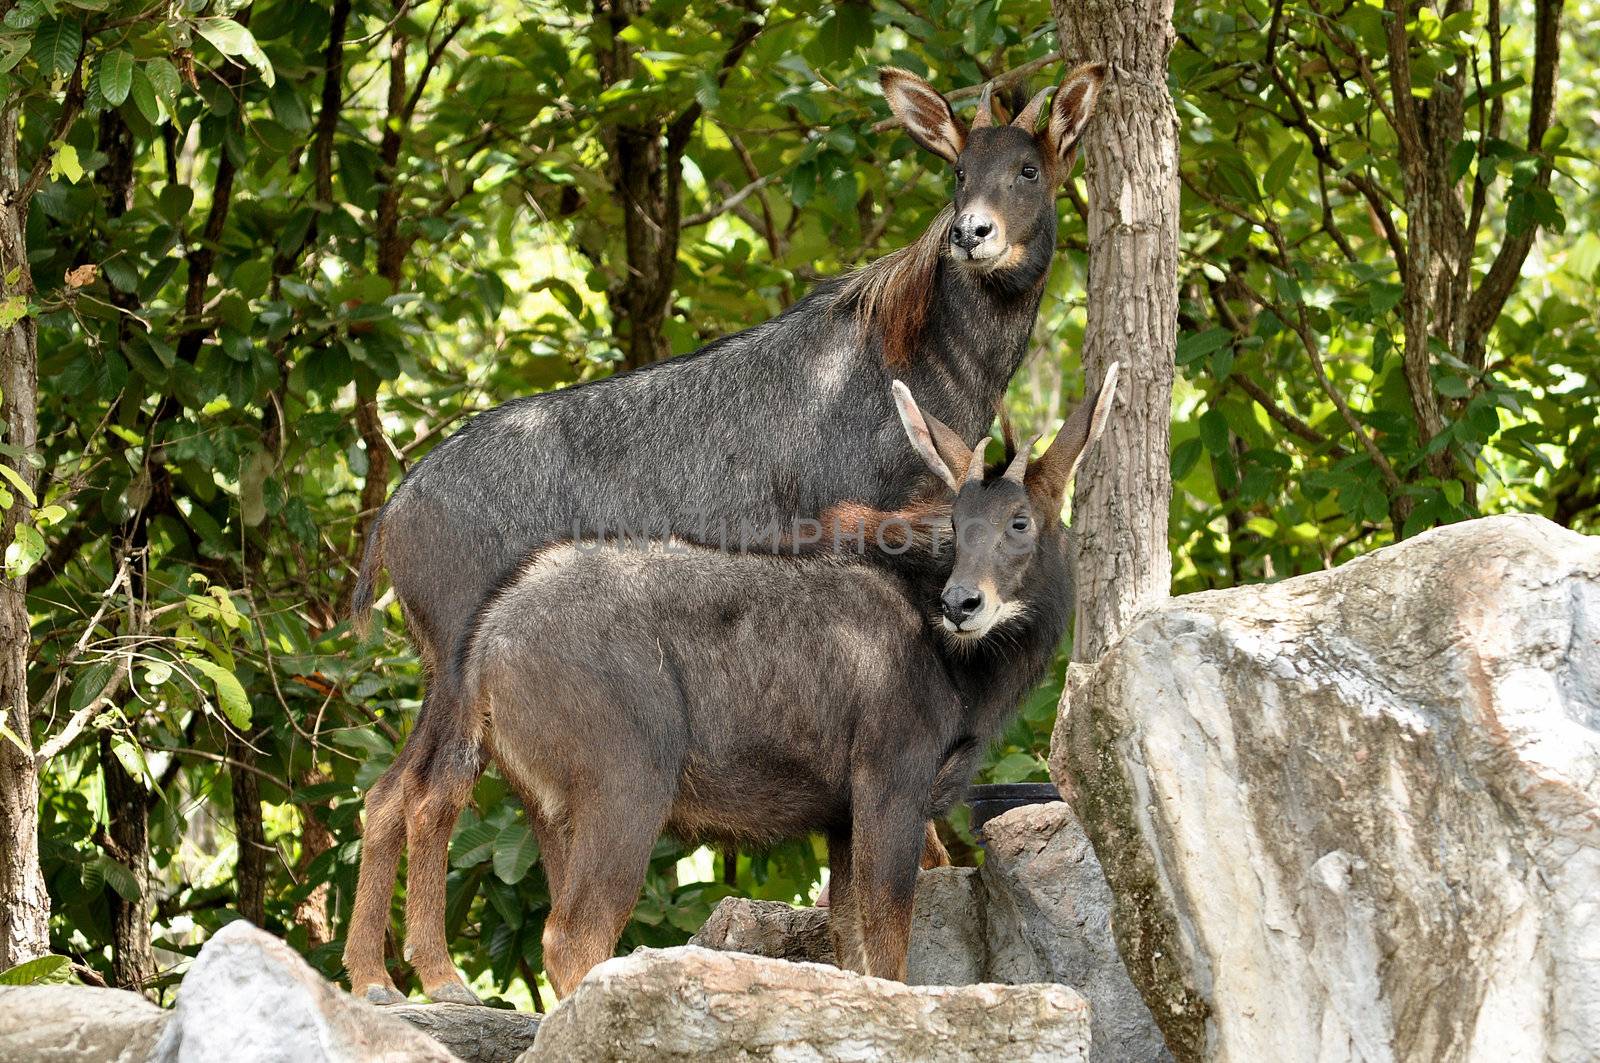 The Sumatran Serow is threatened due to habitat loss and hunting, leading to it being evaluated as vulnerable by the IUCN.
